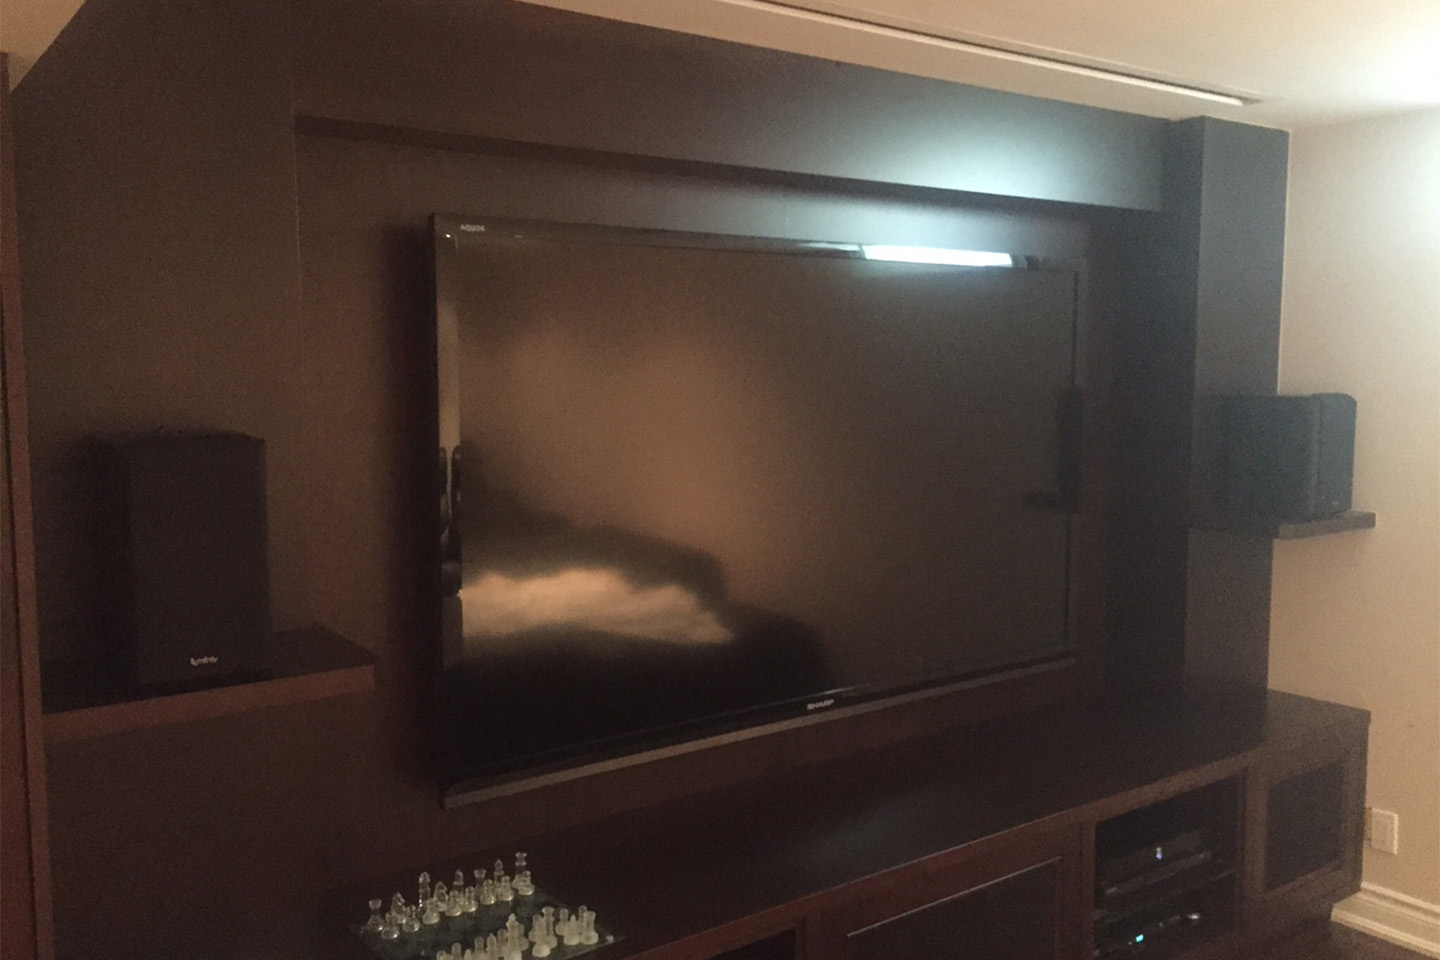 1. TV Install with Retractable Screen